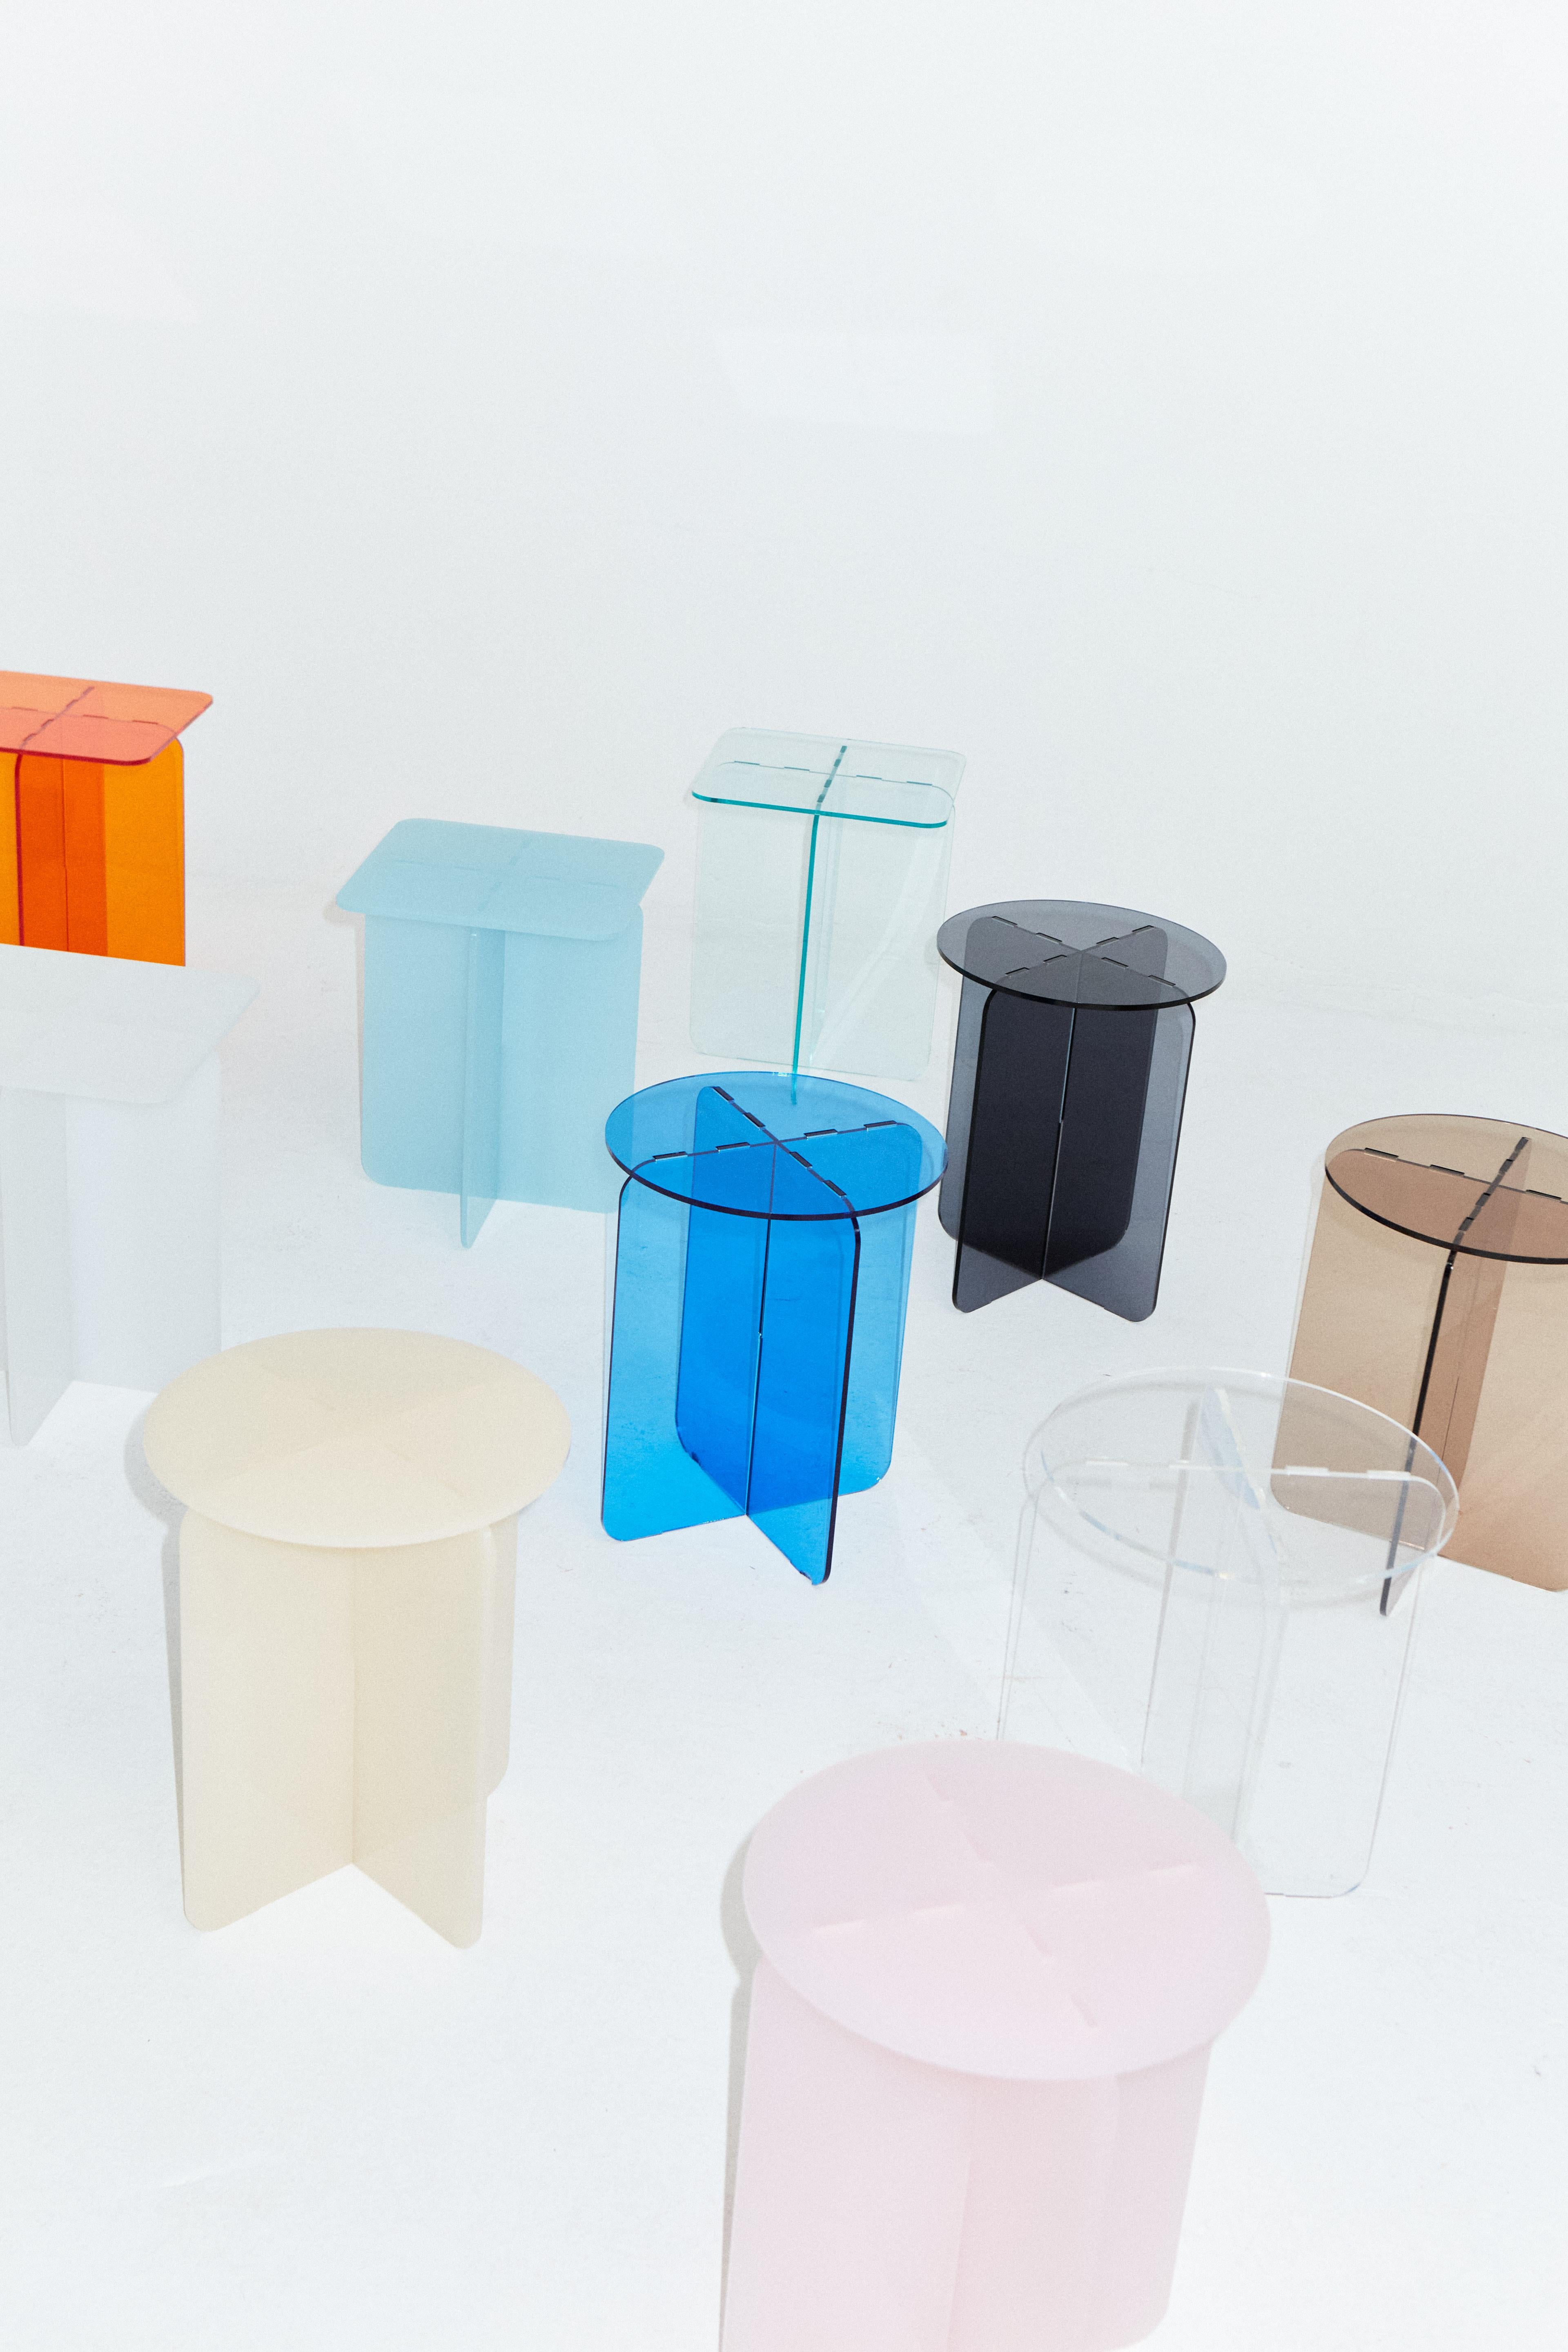 ROMA Table d'appoint Contemporary Acrylic by Ries (Square Top) en vente 10